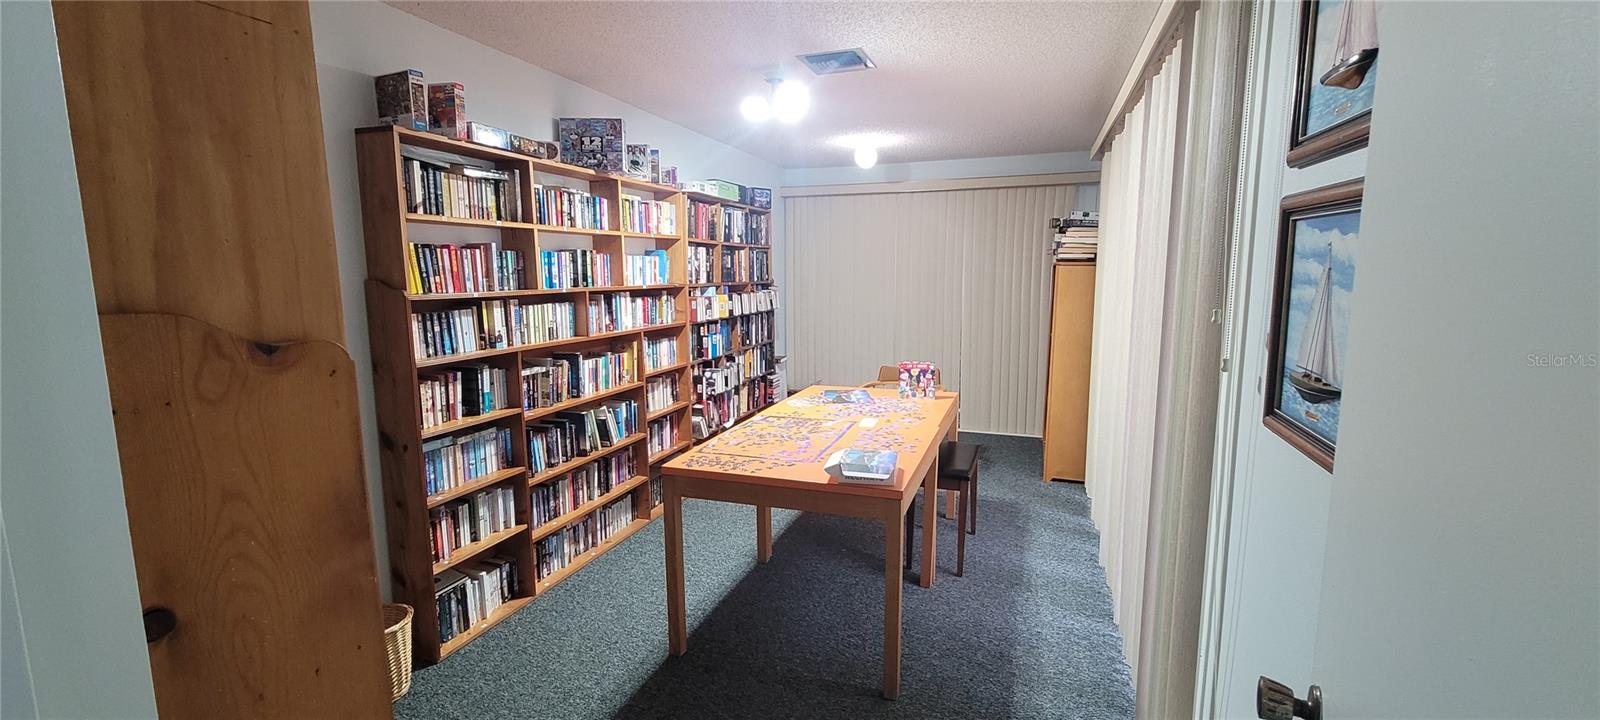 LIBRARY AREA AT CLUBHOUSE